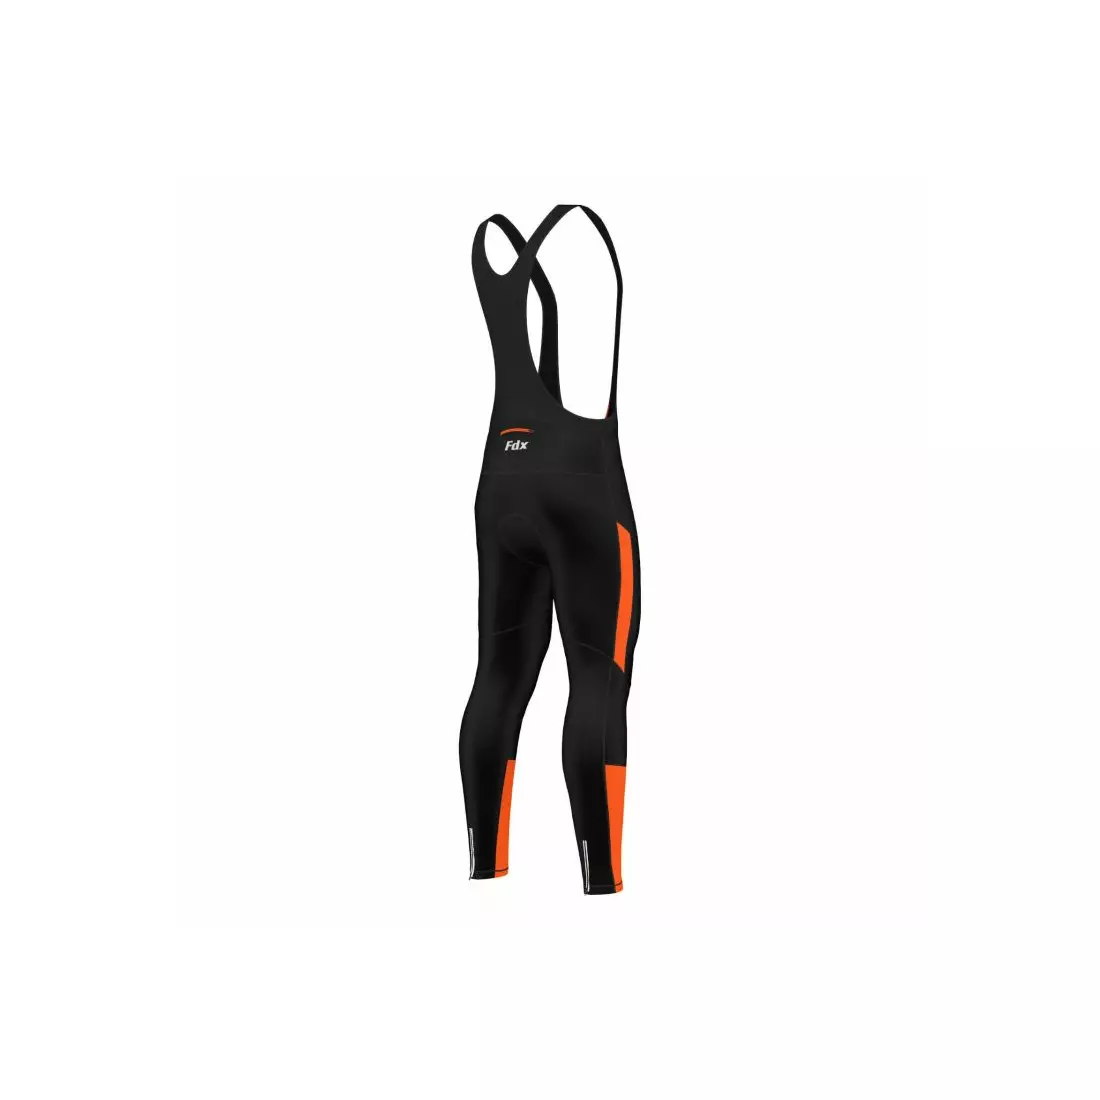 FDX 1220 insulated cycling trousers, black-orange